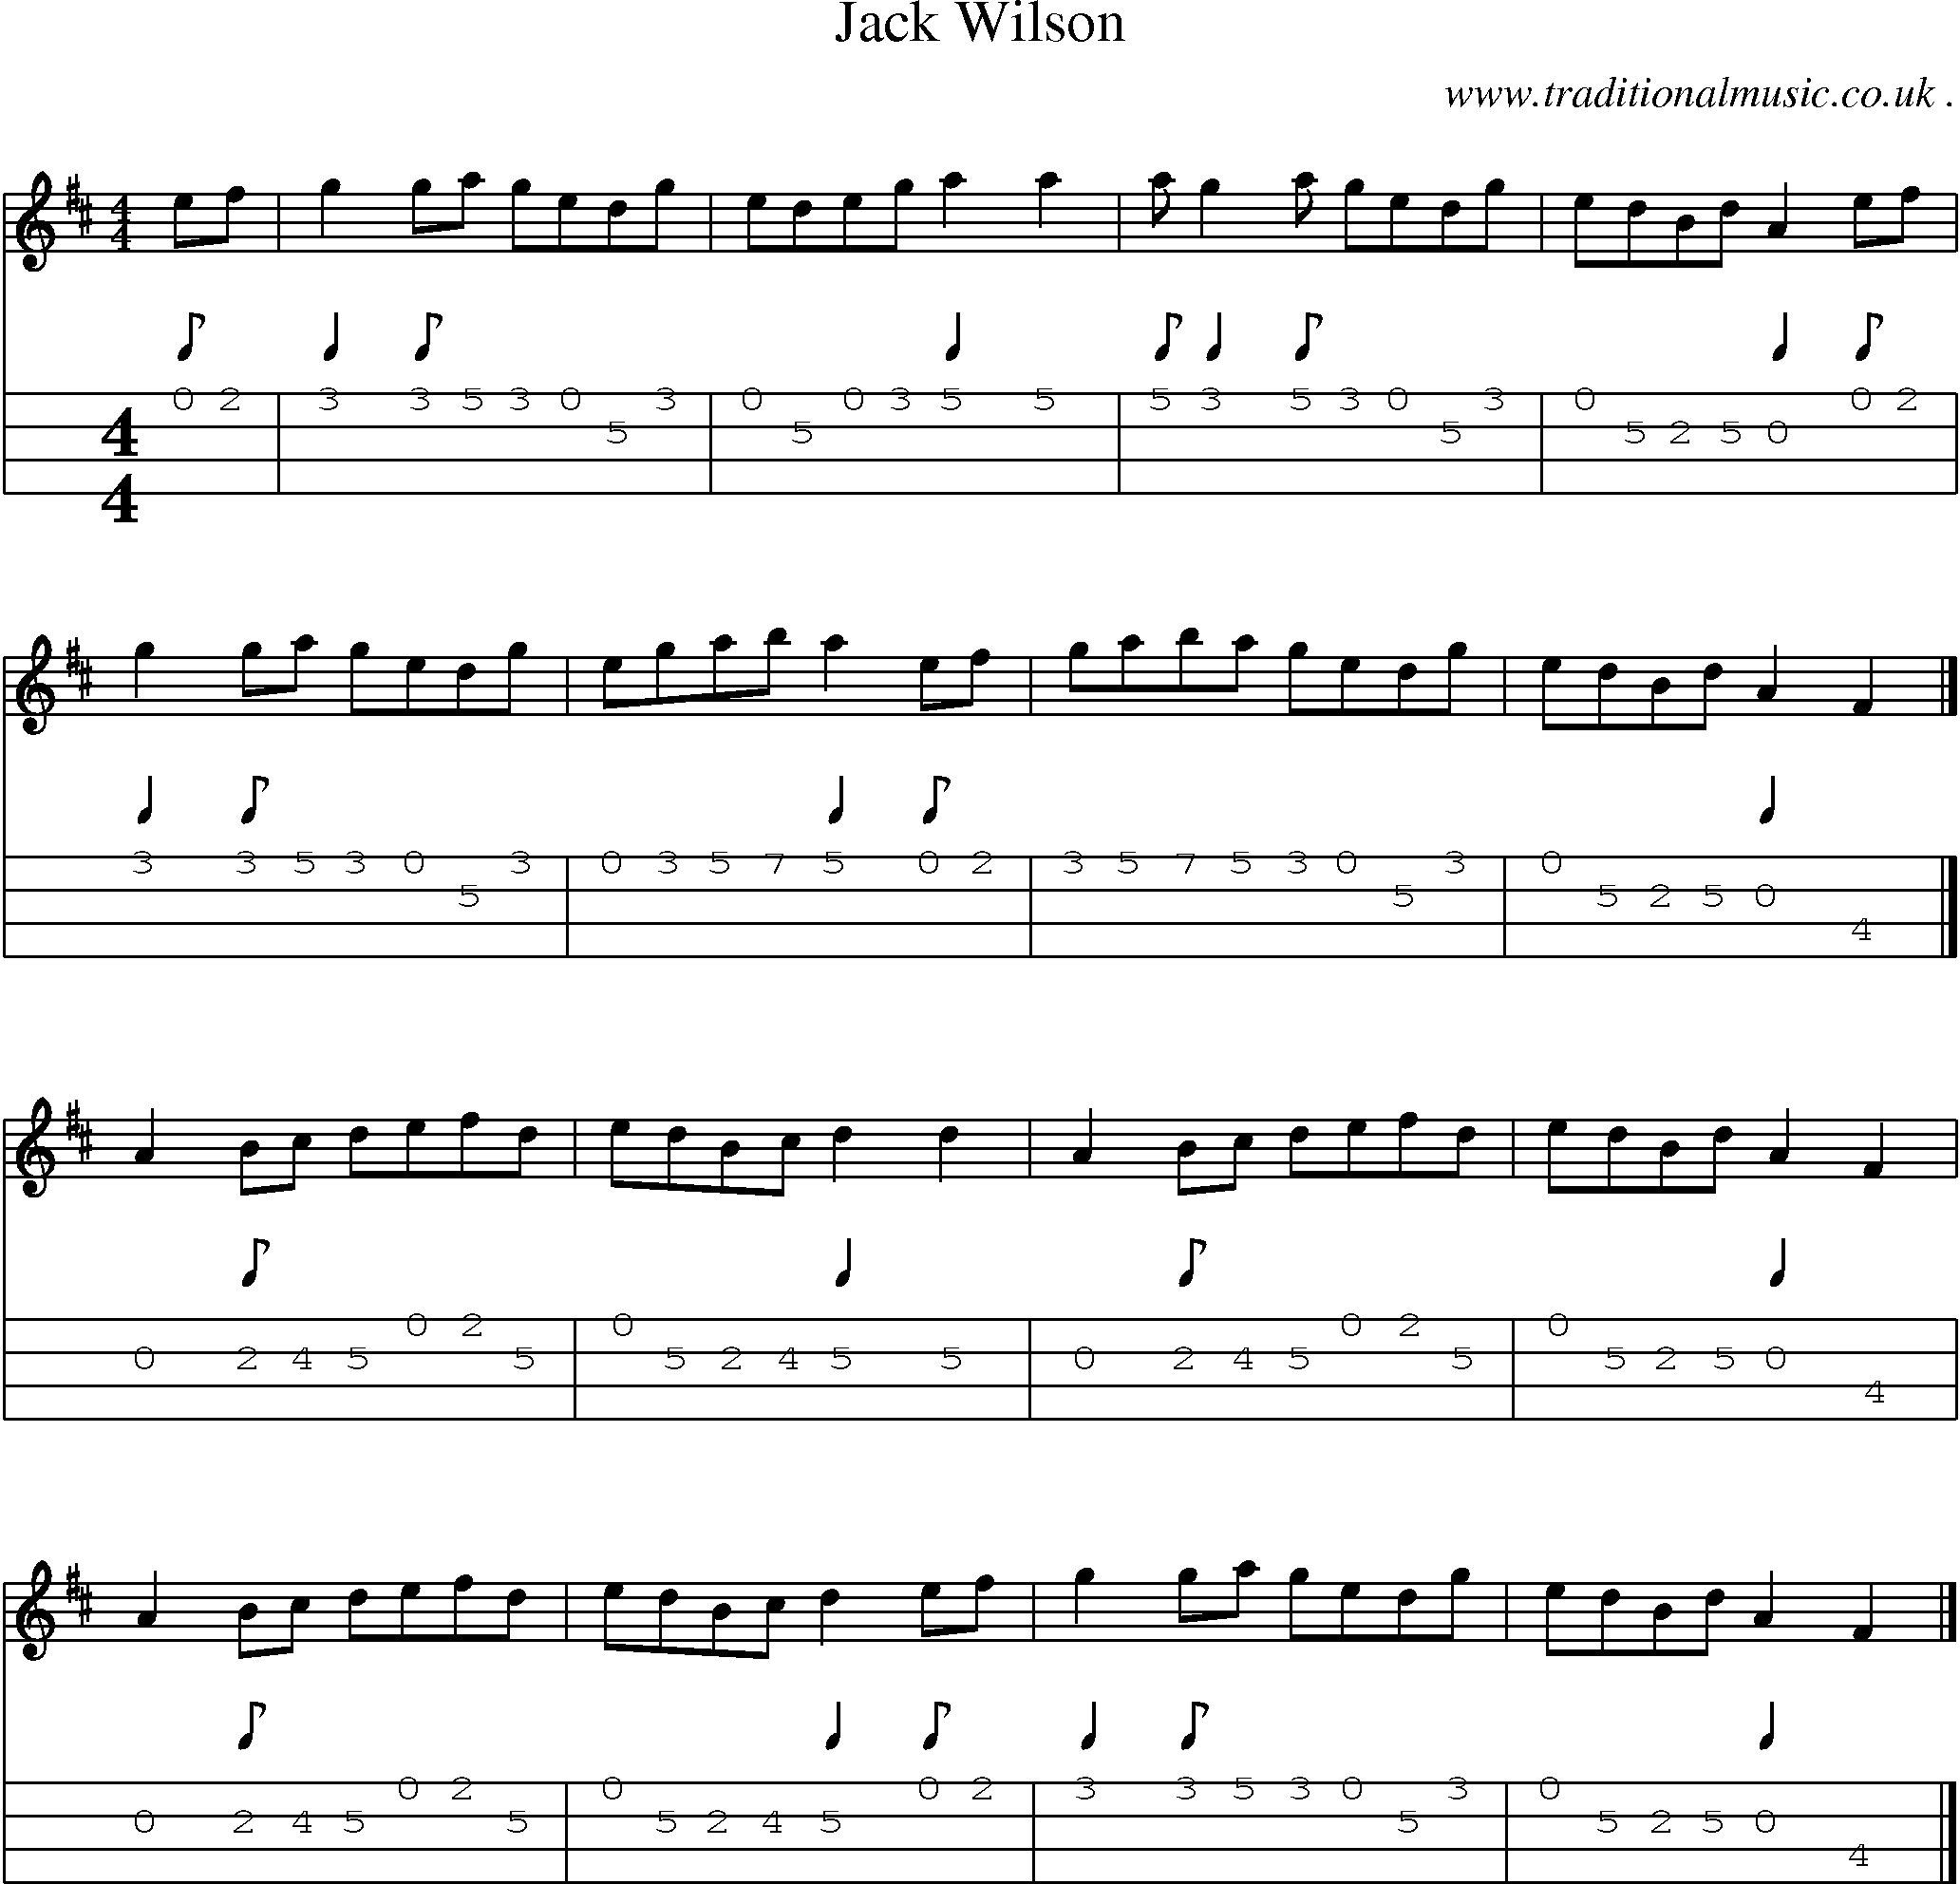 Sheet-music  score, Chords and Mandolin Tabs for Jack Wilson